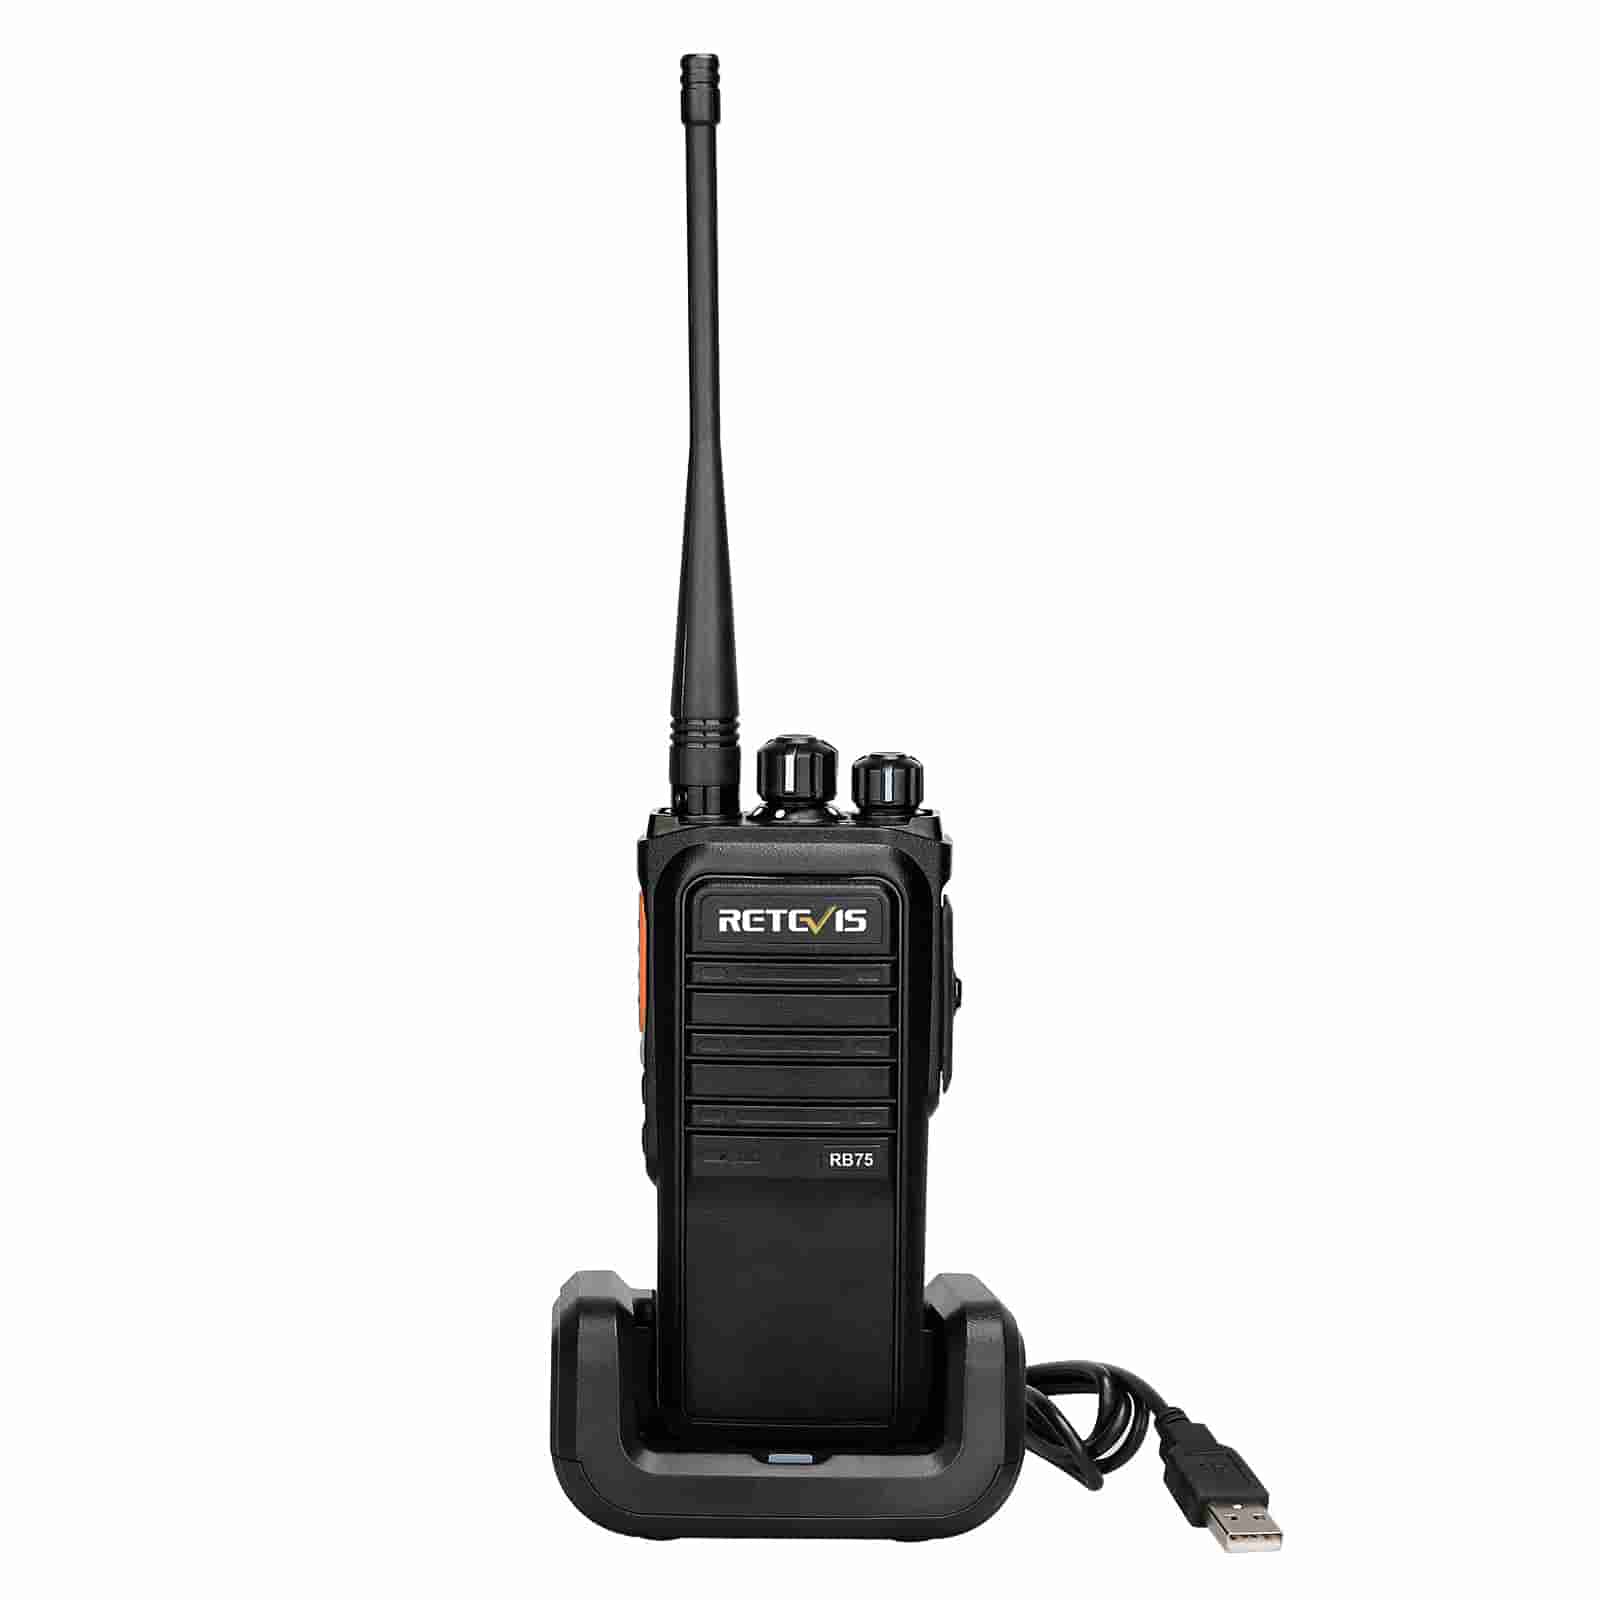 RB75 GMRS Radio